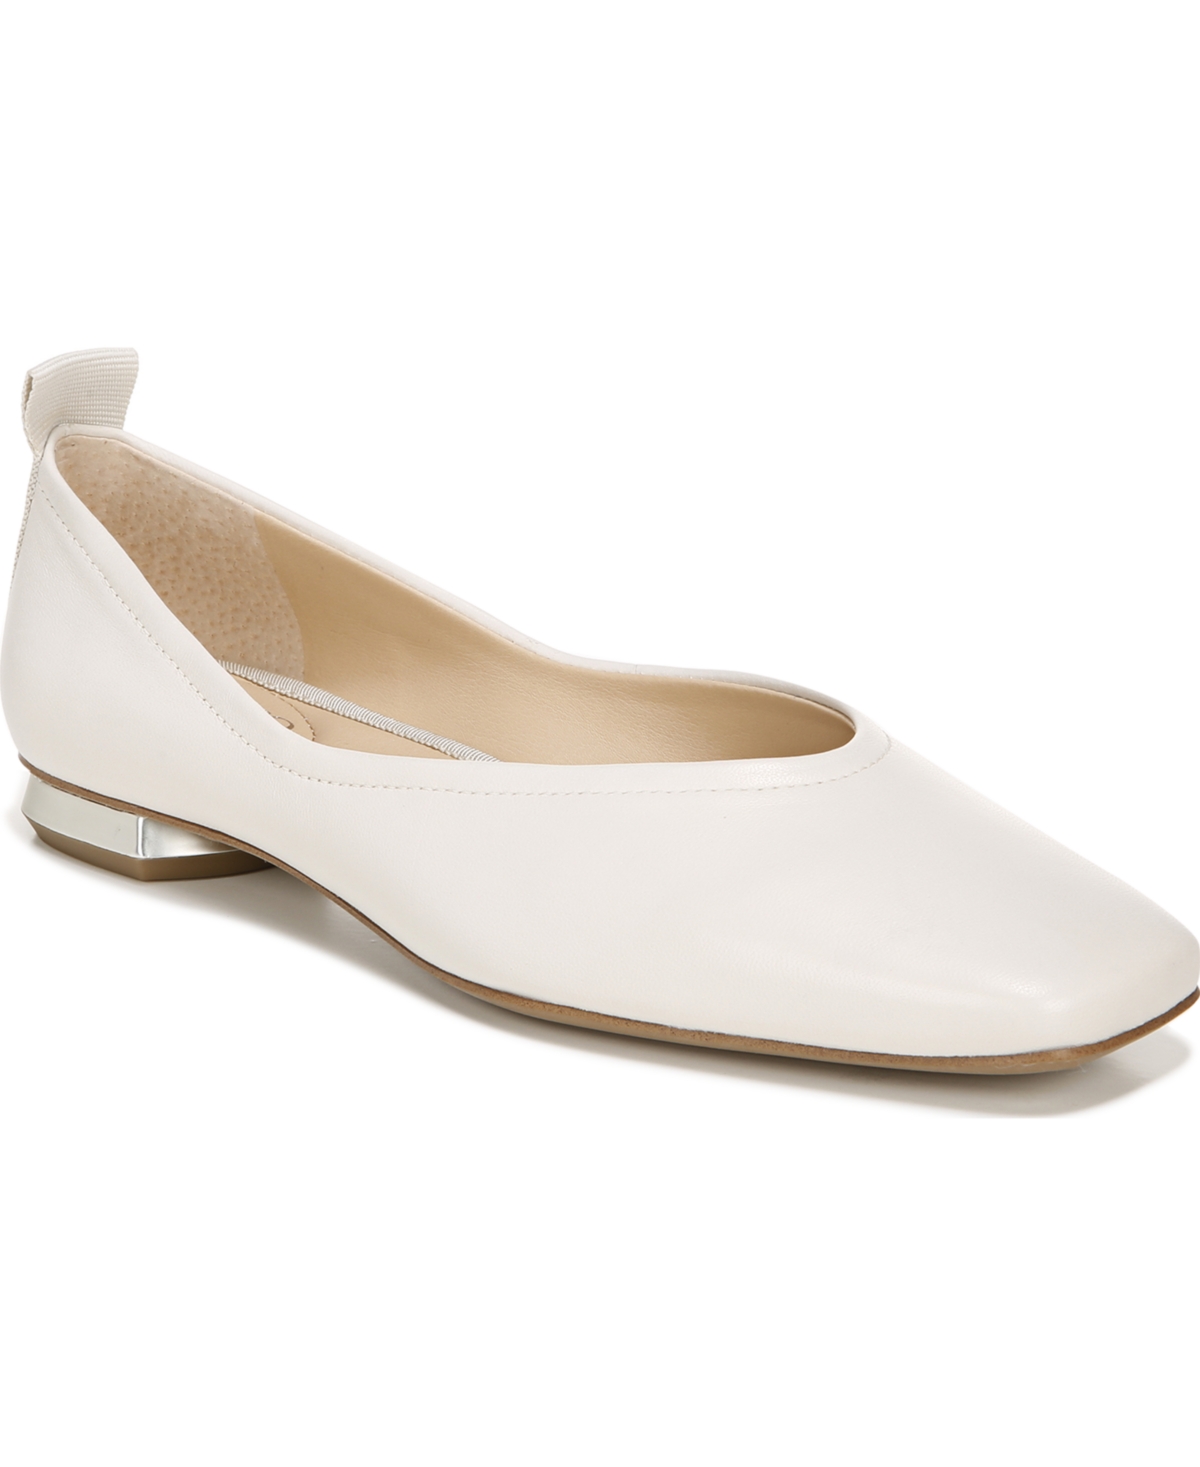 UPC 736716592392 product image for Franco Sarto Ailee Flats Women's Shoes | upcitemdb.com